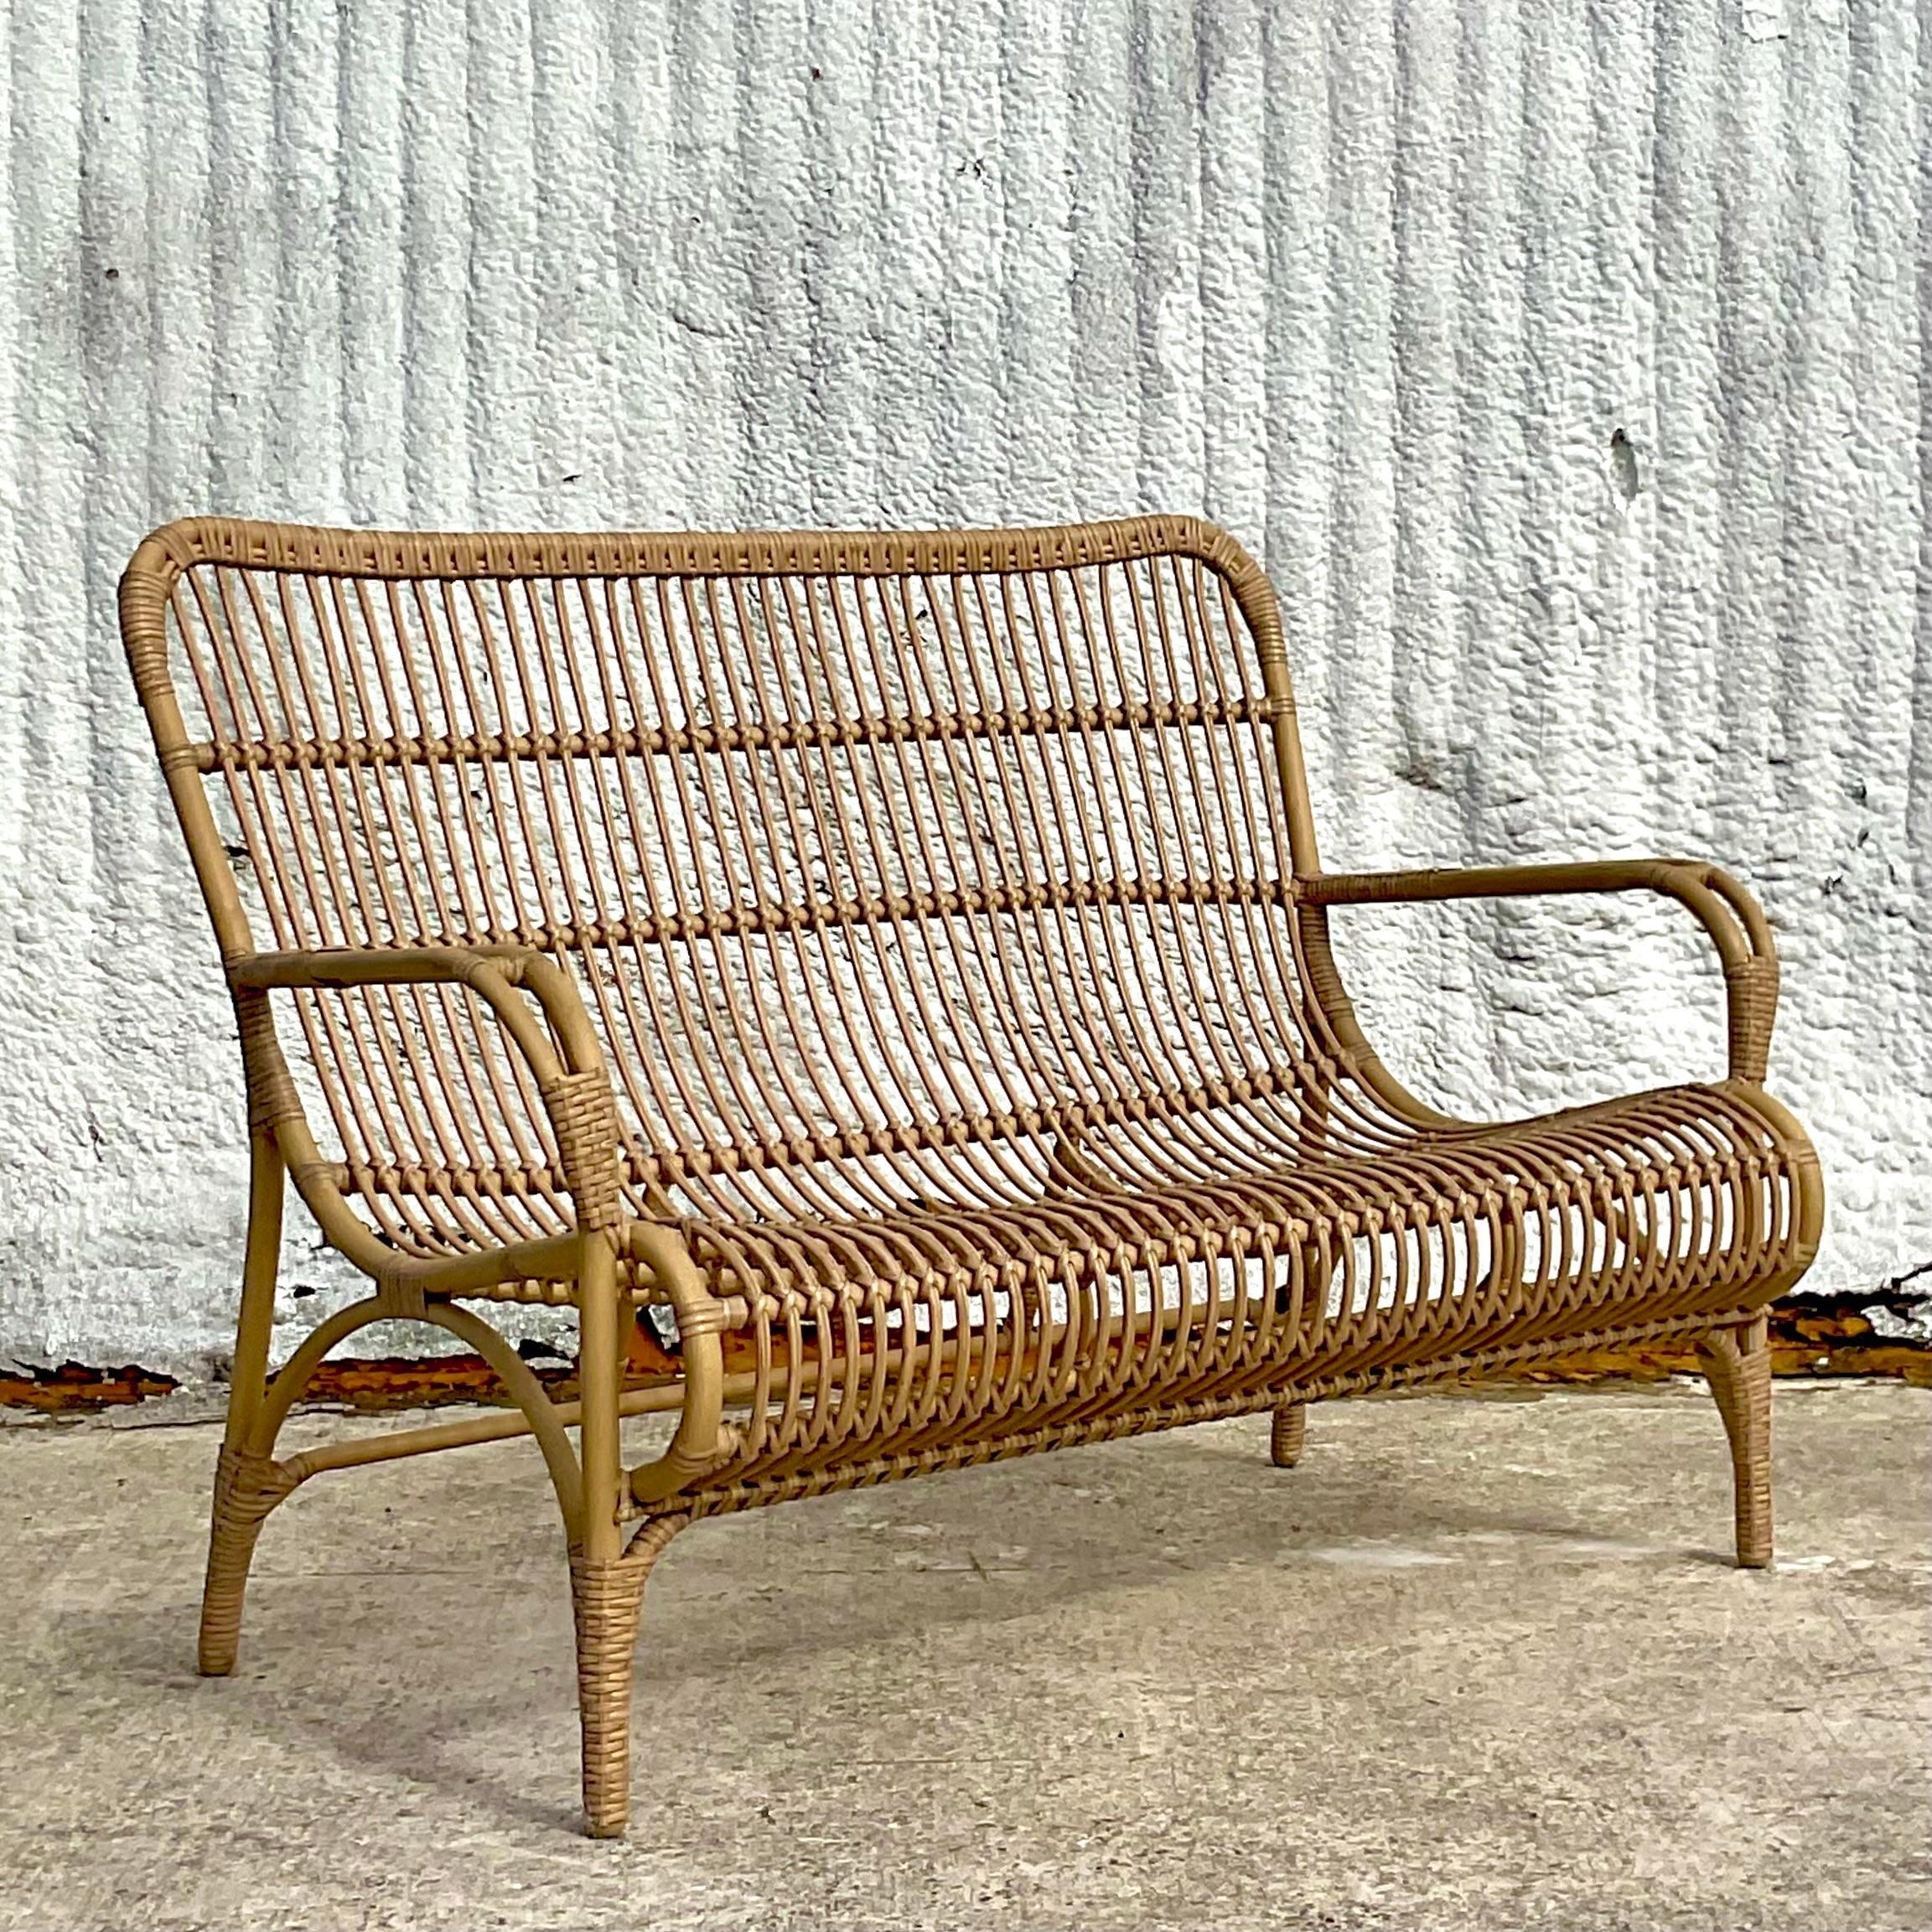 A fabulous vintage Coastal resin rattan loveseat. A chic open weave over an aluminum frame. The perfect piece for a high traffic area indoors or outside in a covered space. Acquired from a Palm Beach estate.